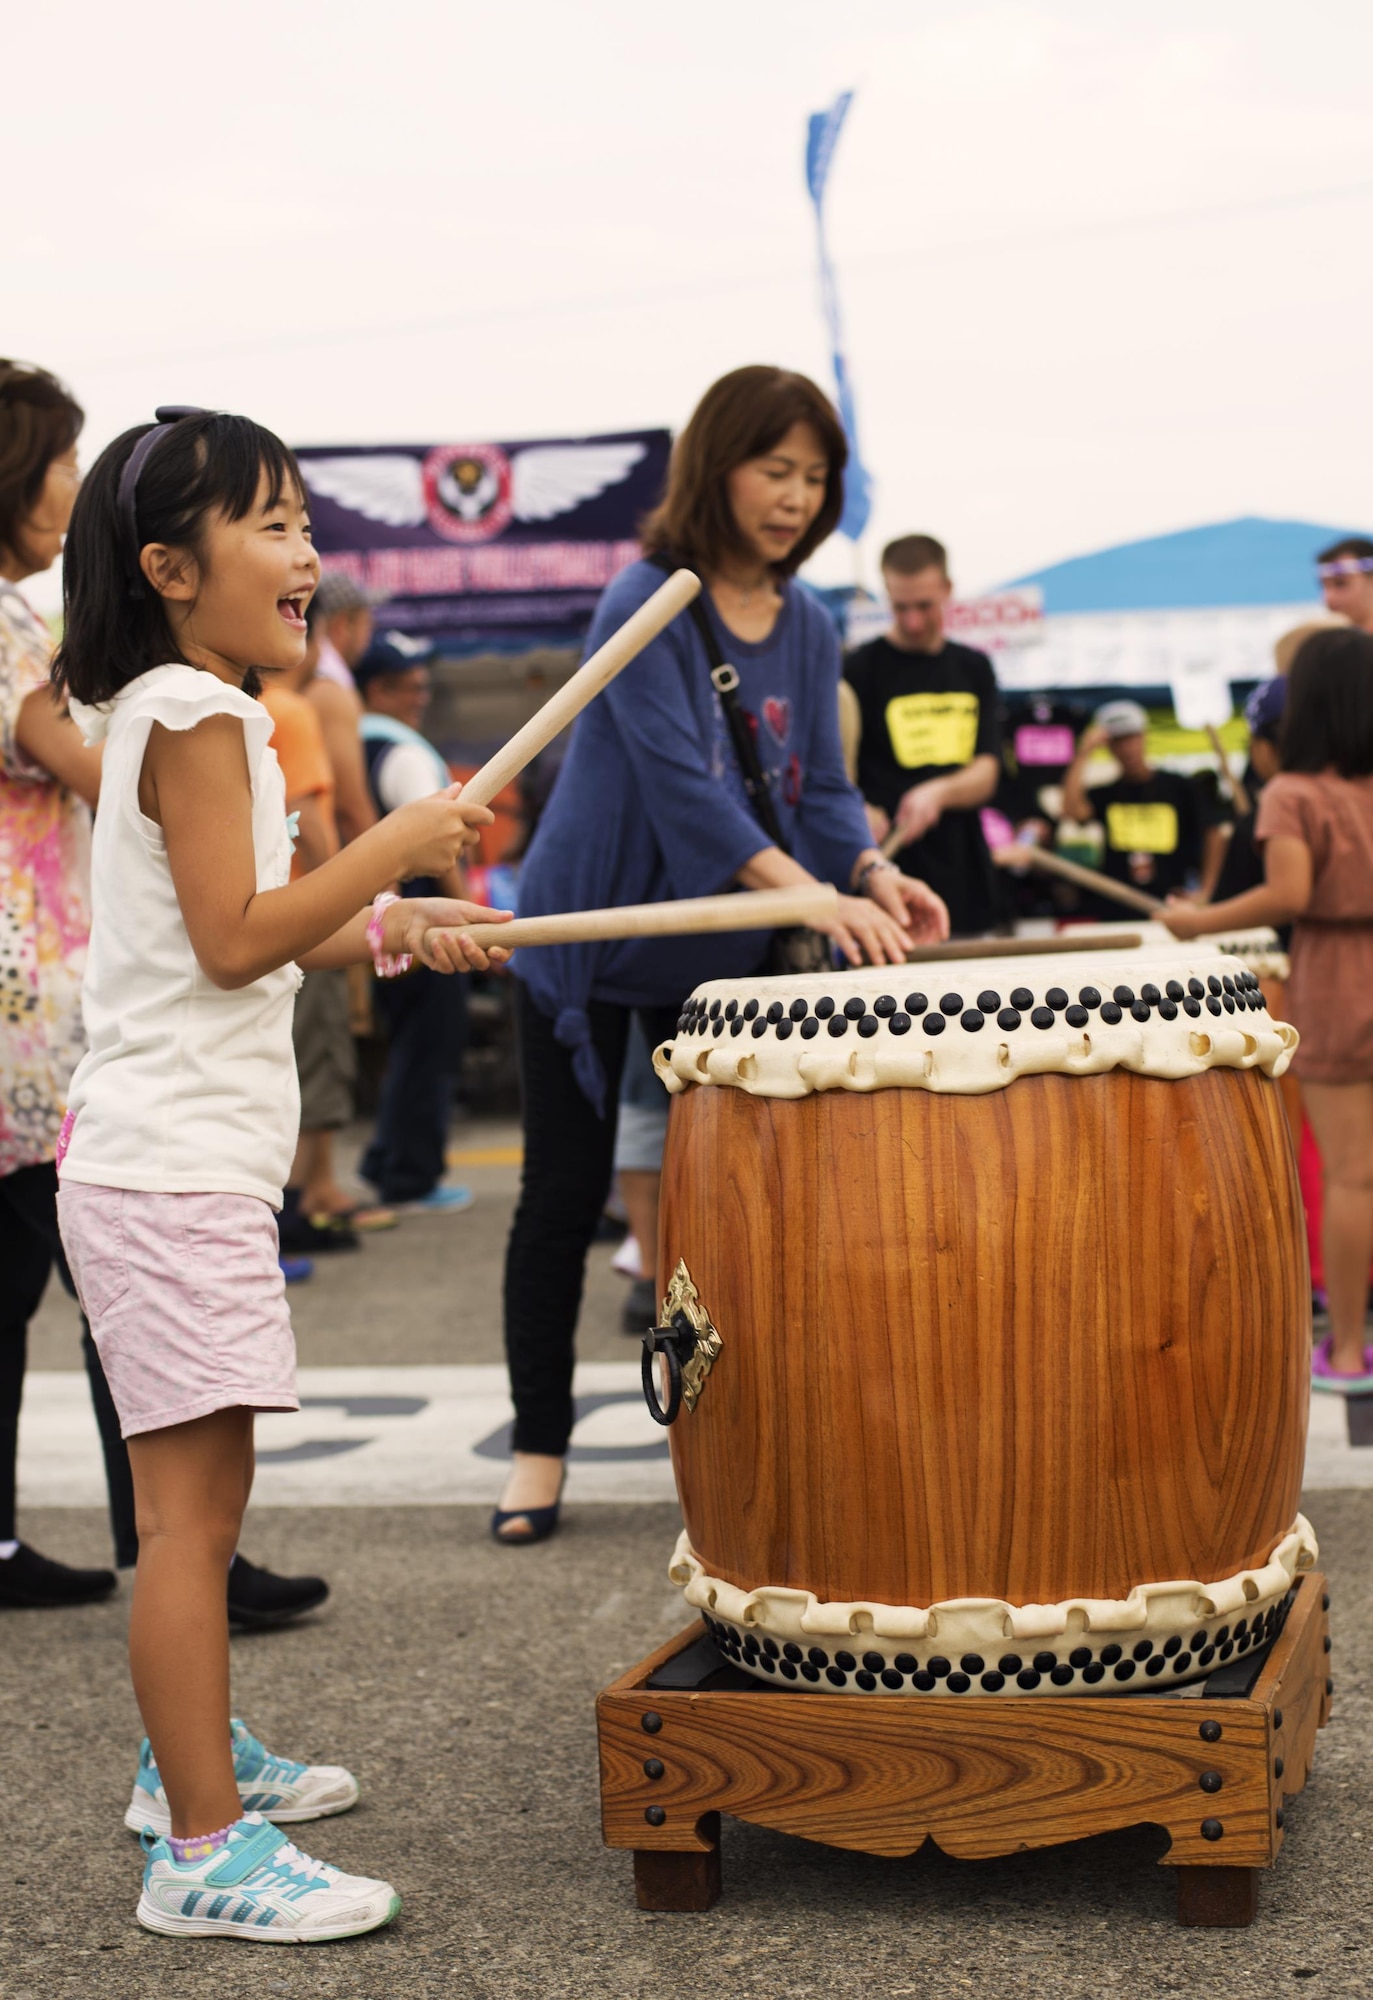 A young girl plays the drums at the Friendship Festival on 17 Sept. 2016, at Yokota Air Base, Japan. The Friendship Festival is an annual event where over 100,000 members of the local community come to see the base. (U.S. Air Force photo by Airman 1st Class Donald Hudson/Released)